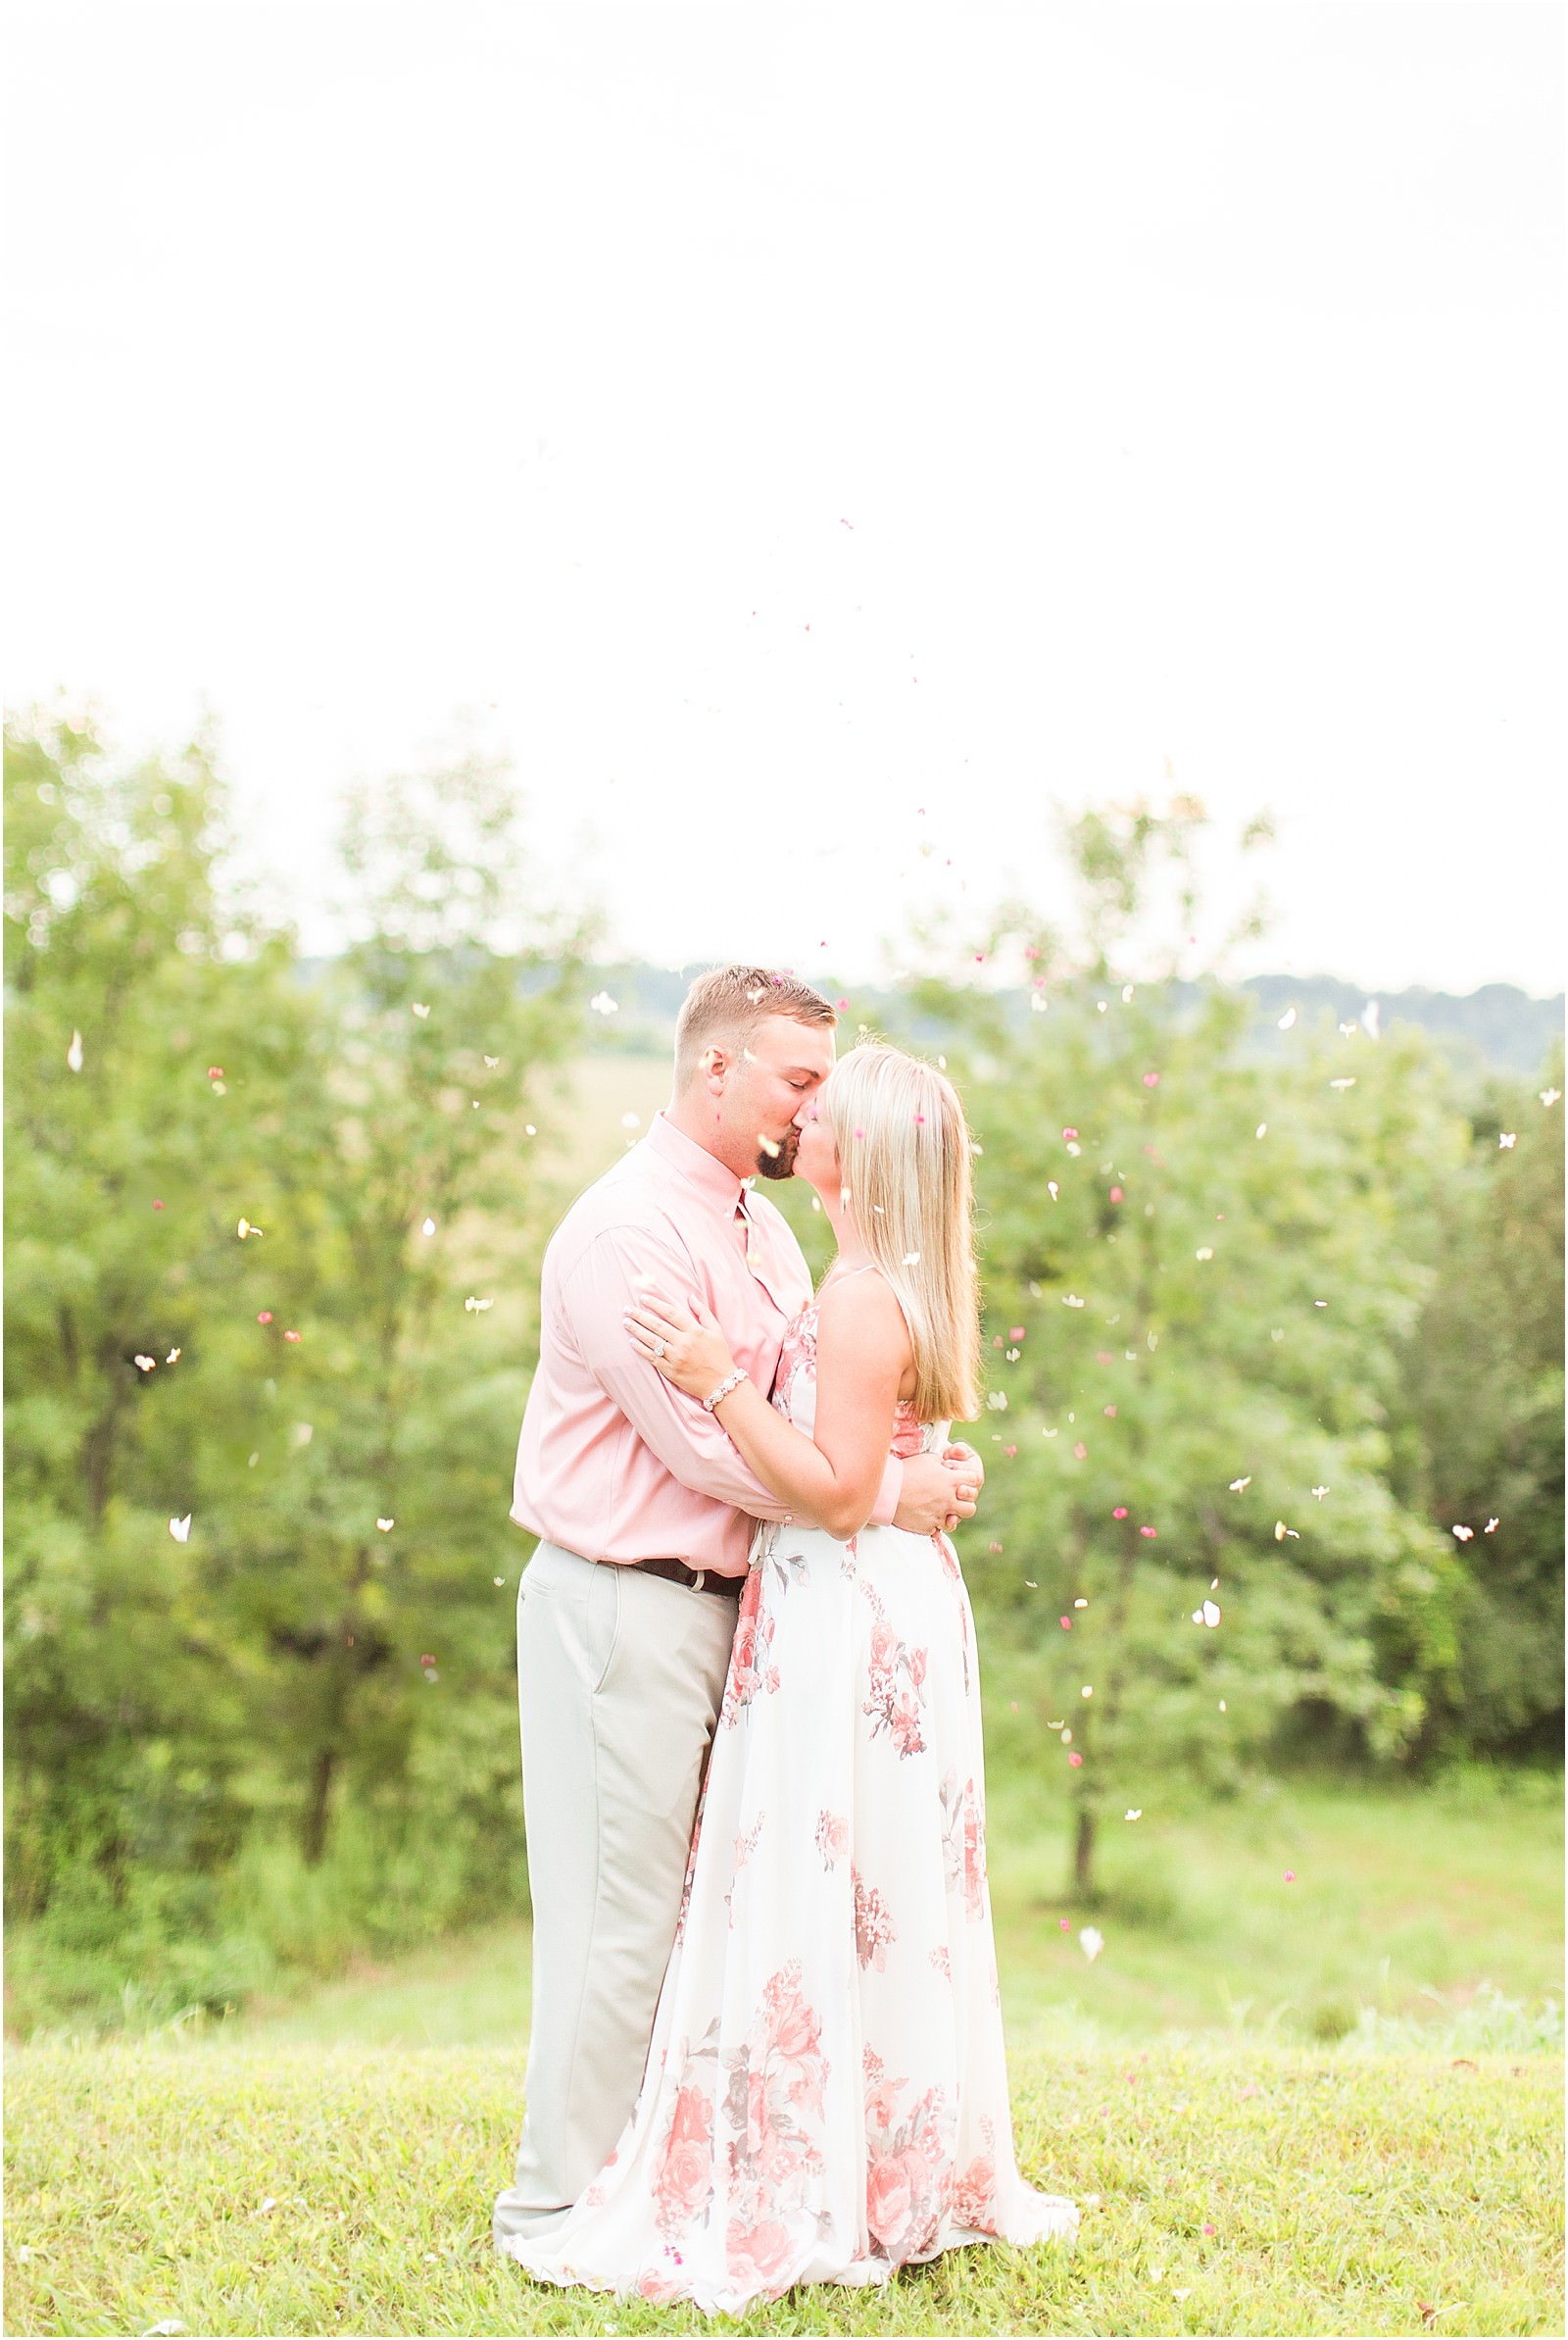 Lauren and Bryce | The Corner House B&ed and Breakfast Engagement Session | Bret and Brandie Photography 028.jpg